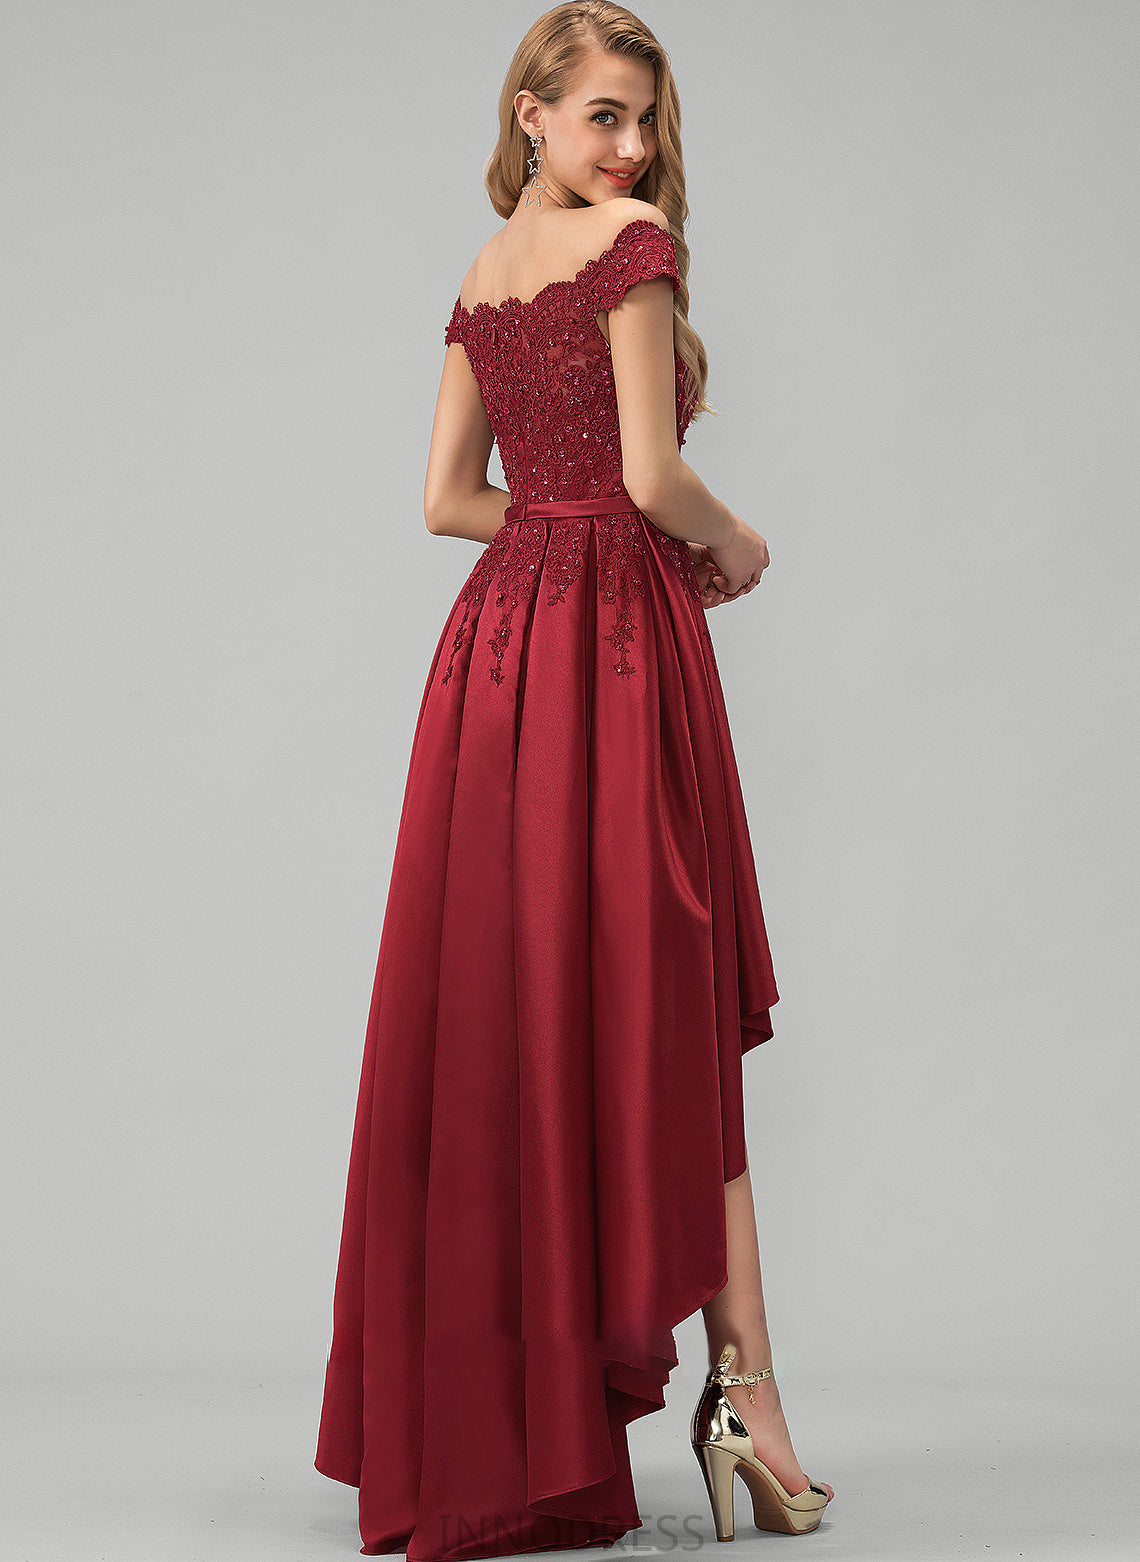 Bow(s) Lace Satin With Sequins Beading Ball-Gown/Princess Asymmetrical Off-the-Shoulder Krista Prom Dresses